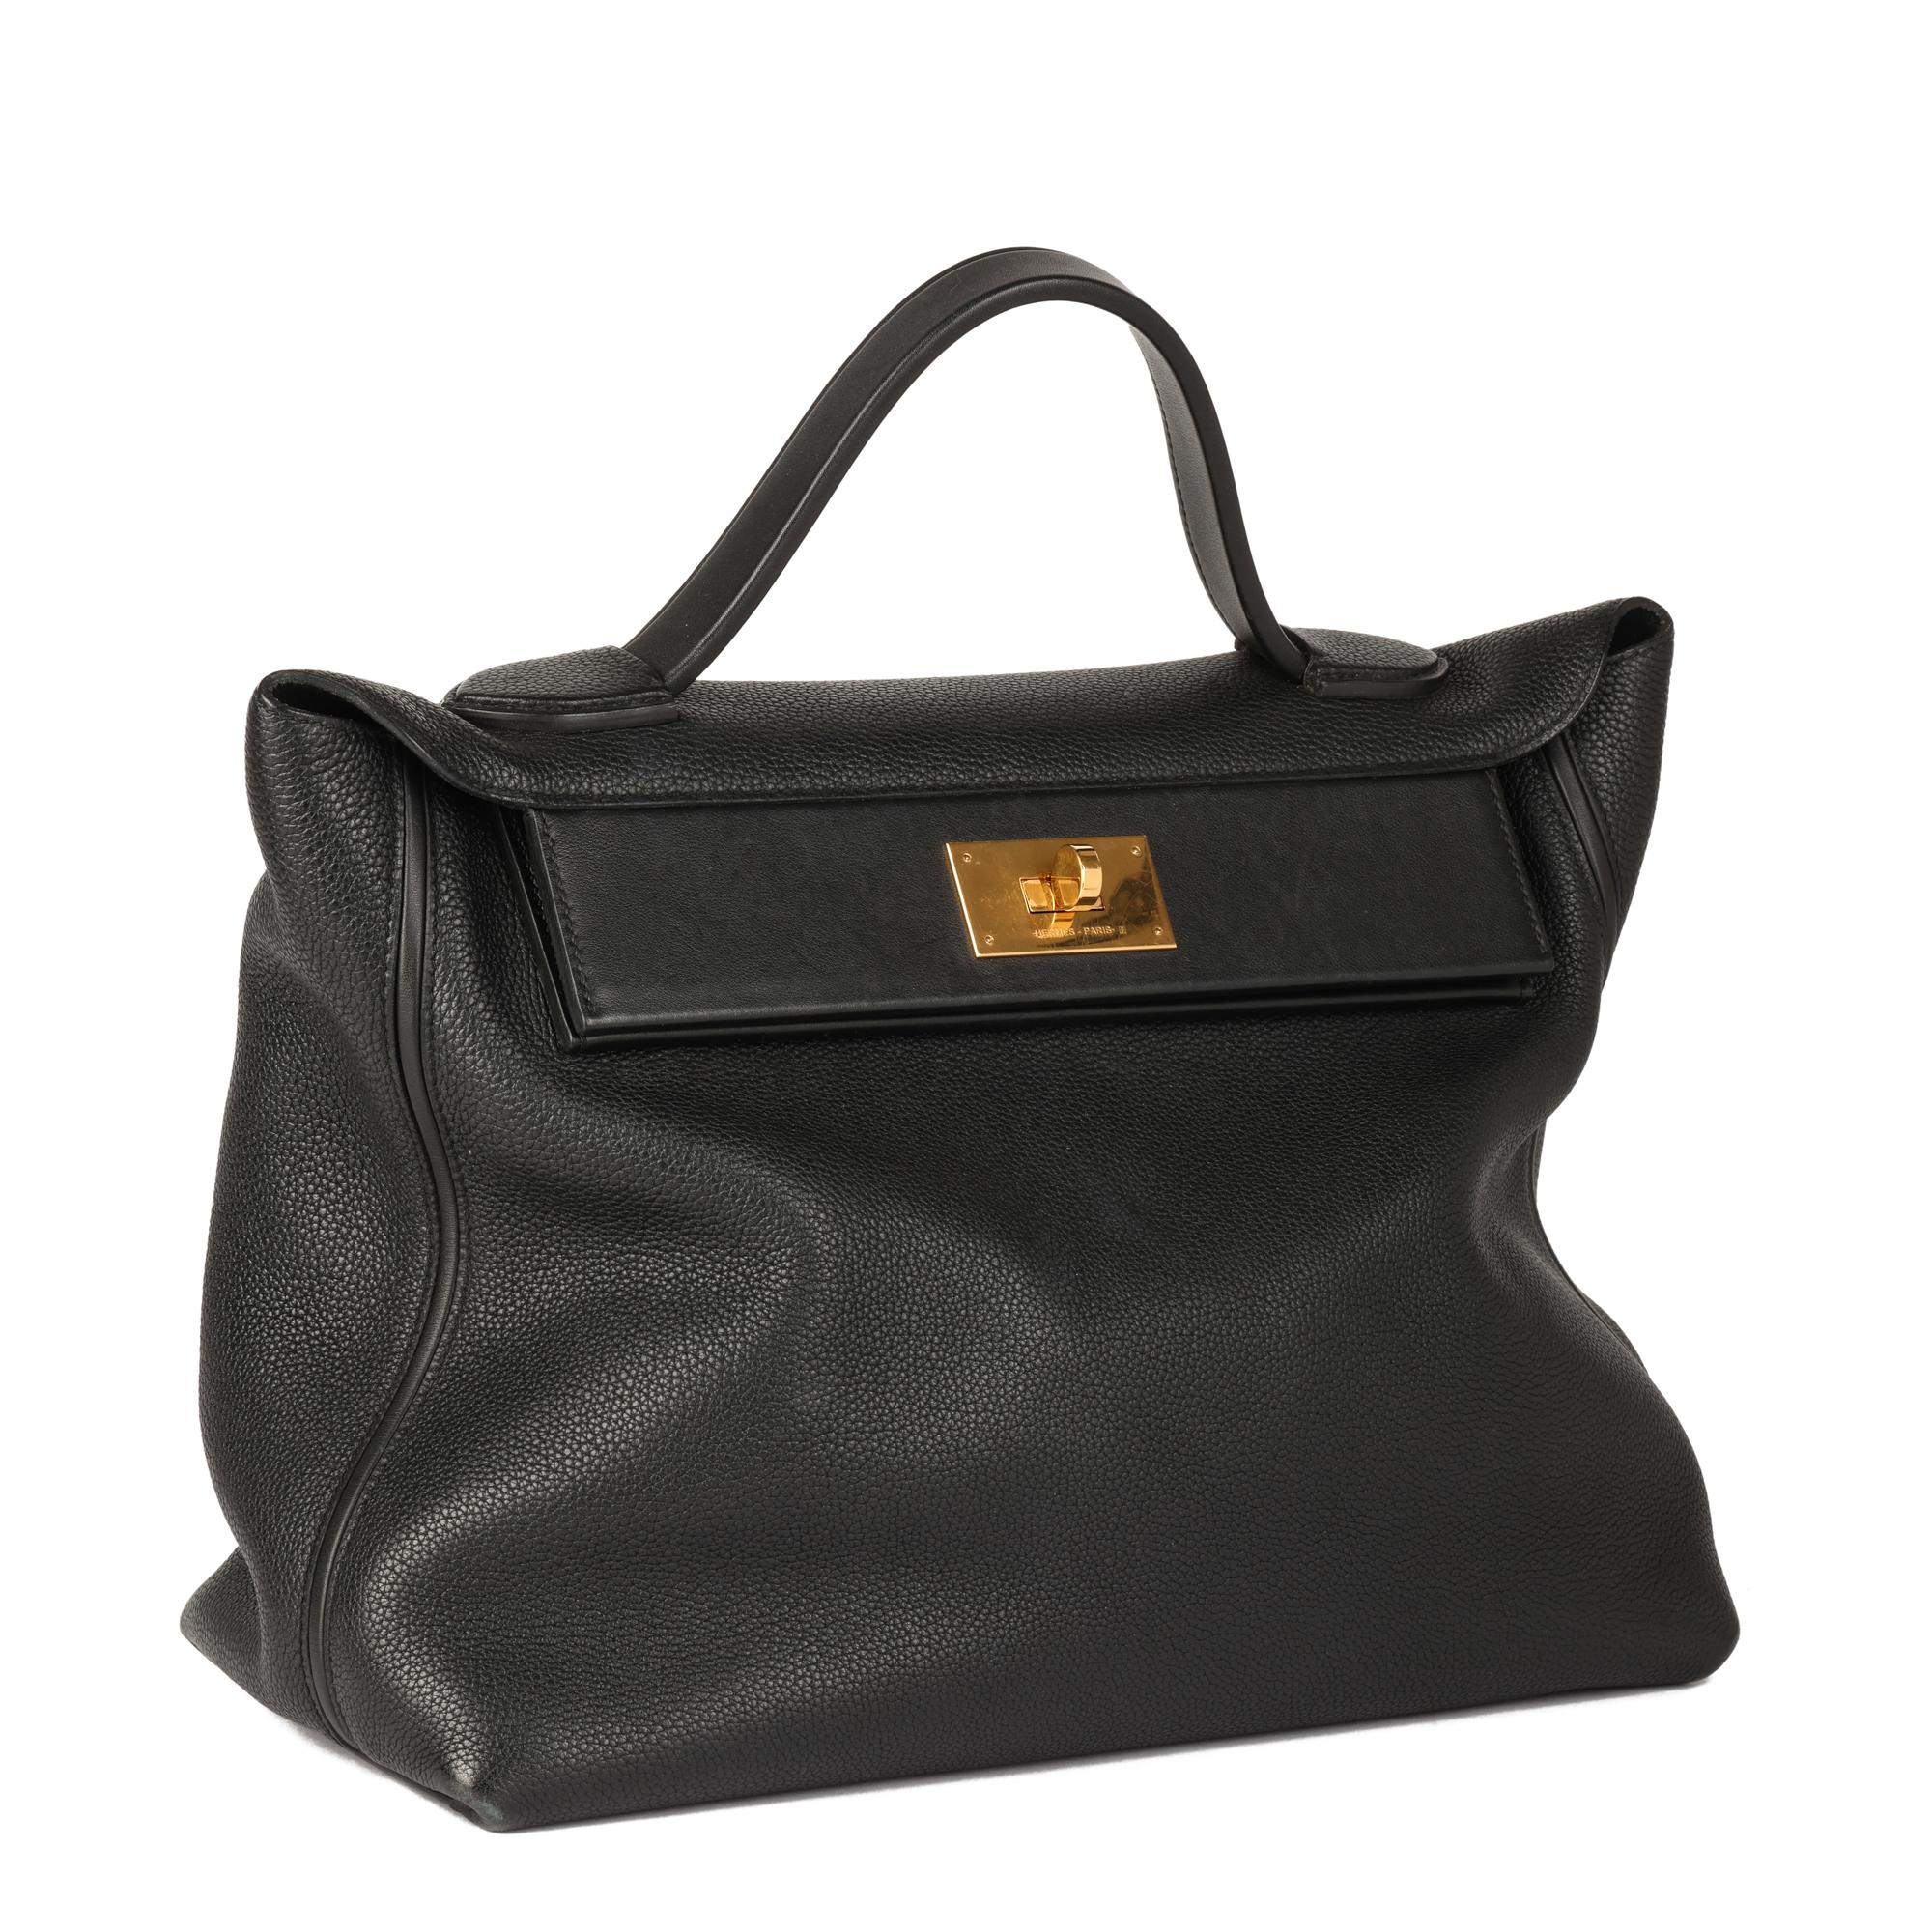 Hermès Black Togo Leather & Swift Leather 24/24 35cm

CONDITION NOTES
The exterior is in very good condition with light signs of use and scratches on the swift leather.
The interior is in excellent condition with light signs of use.
The hardware is